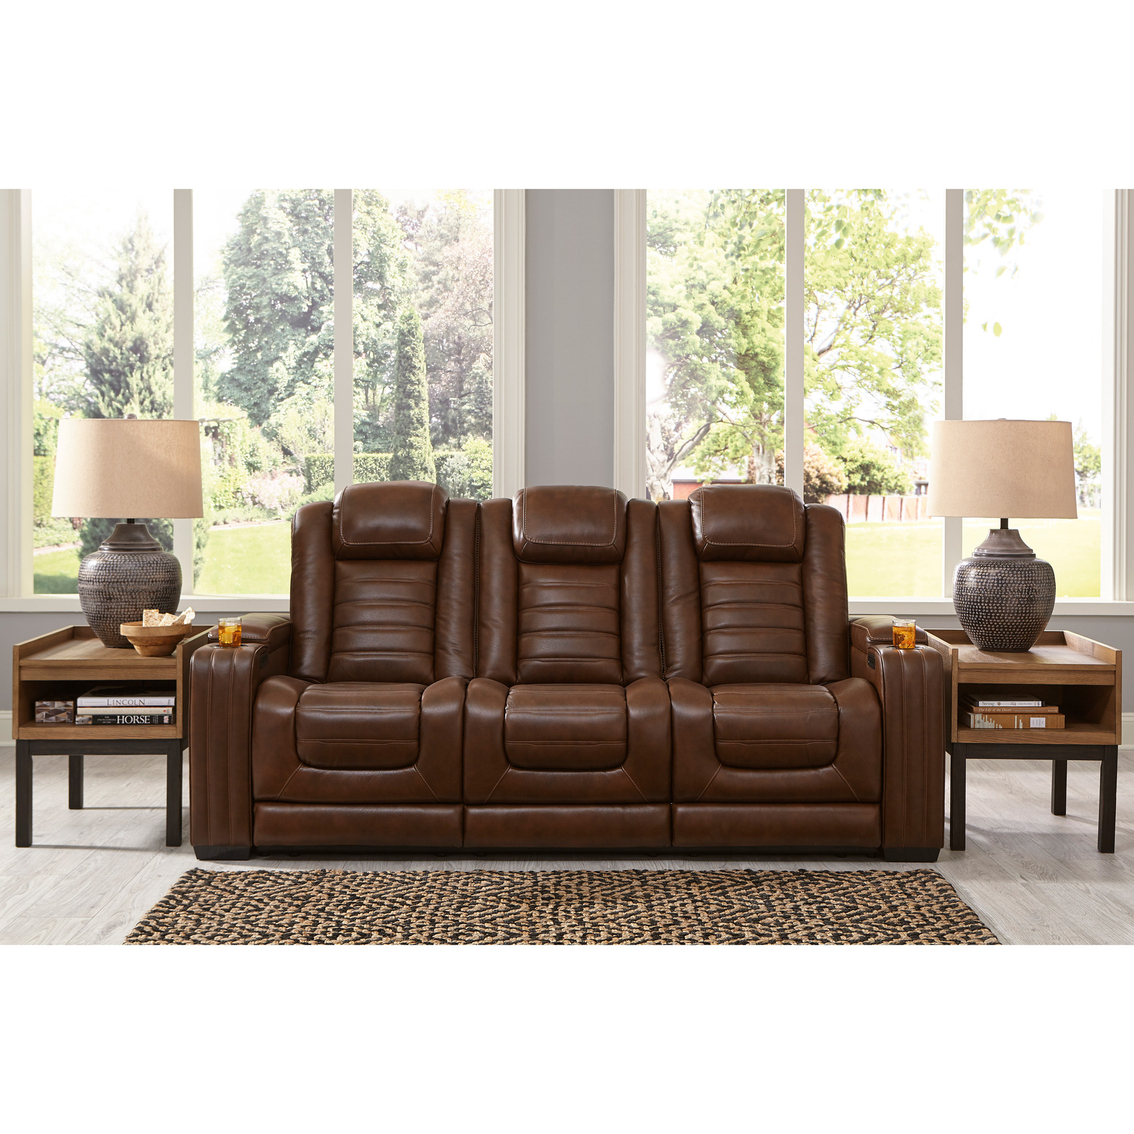 Signature Design by Ashley Backtrack Power Reclining Sofa with Adjustable Headrest - Image 6 of 10